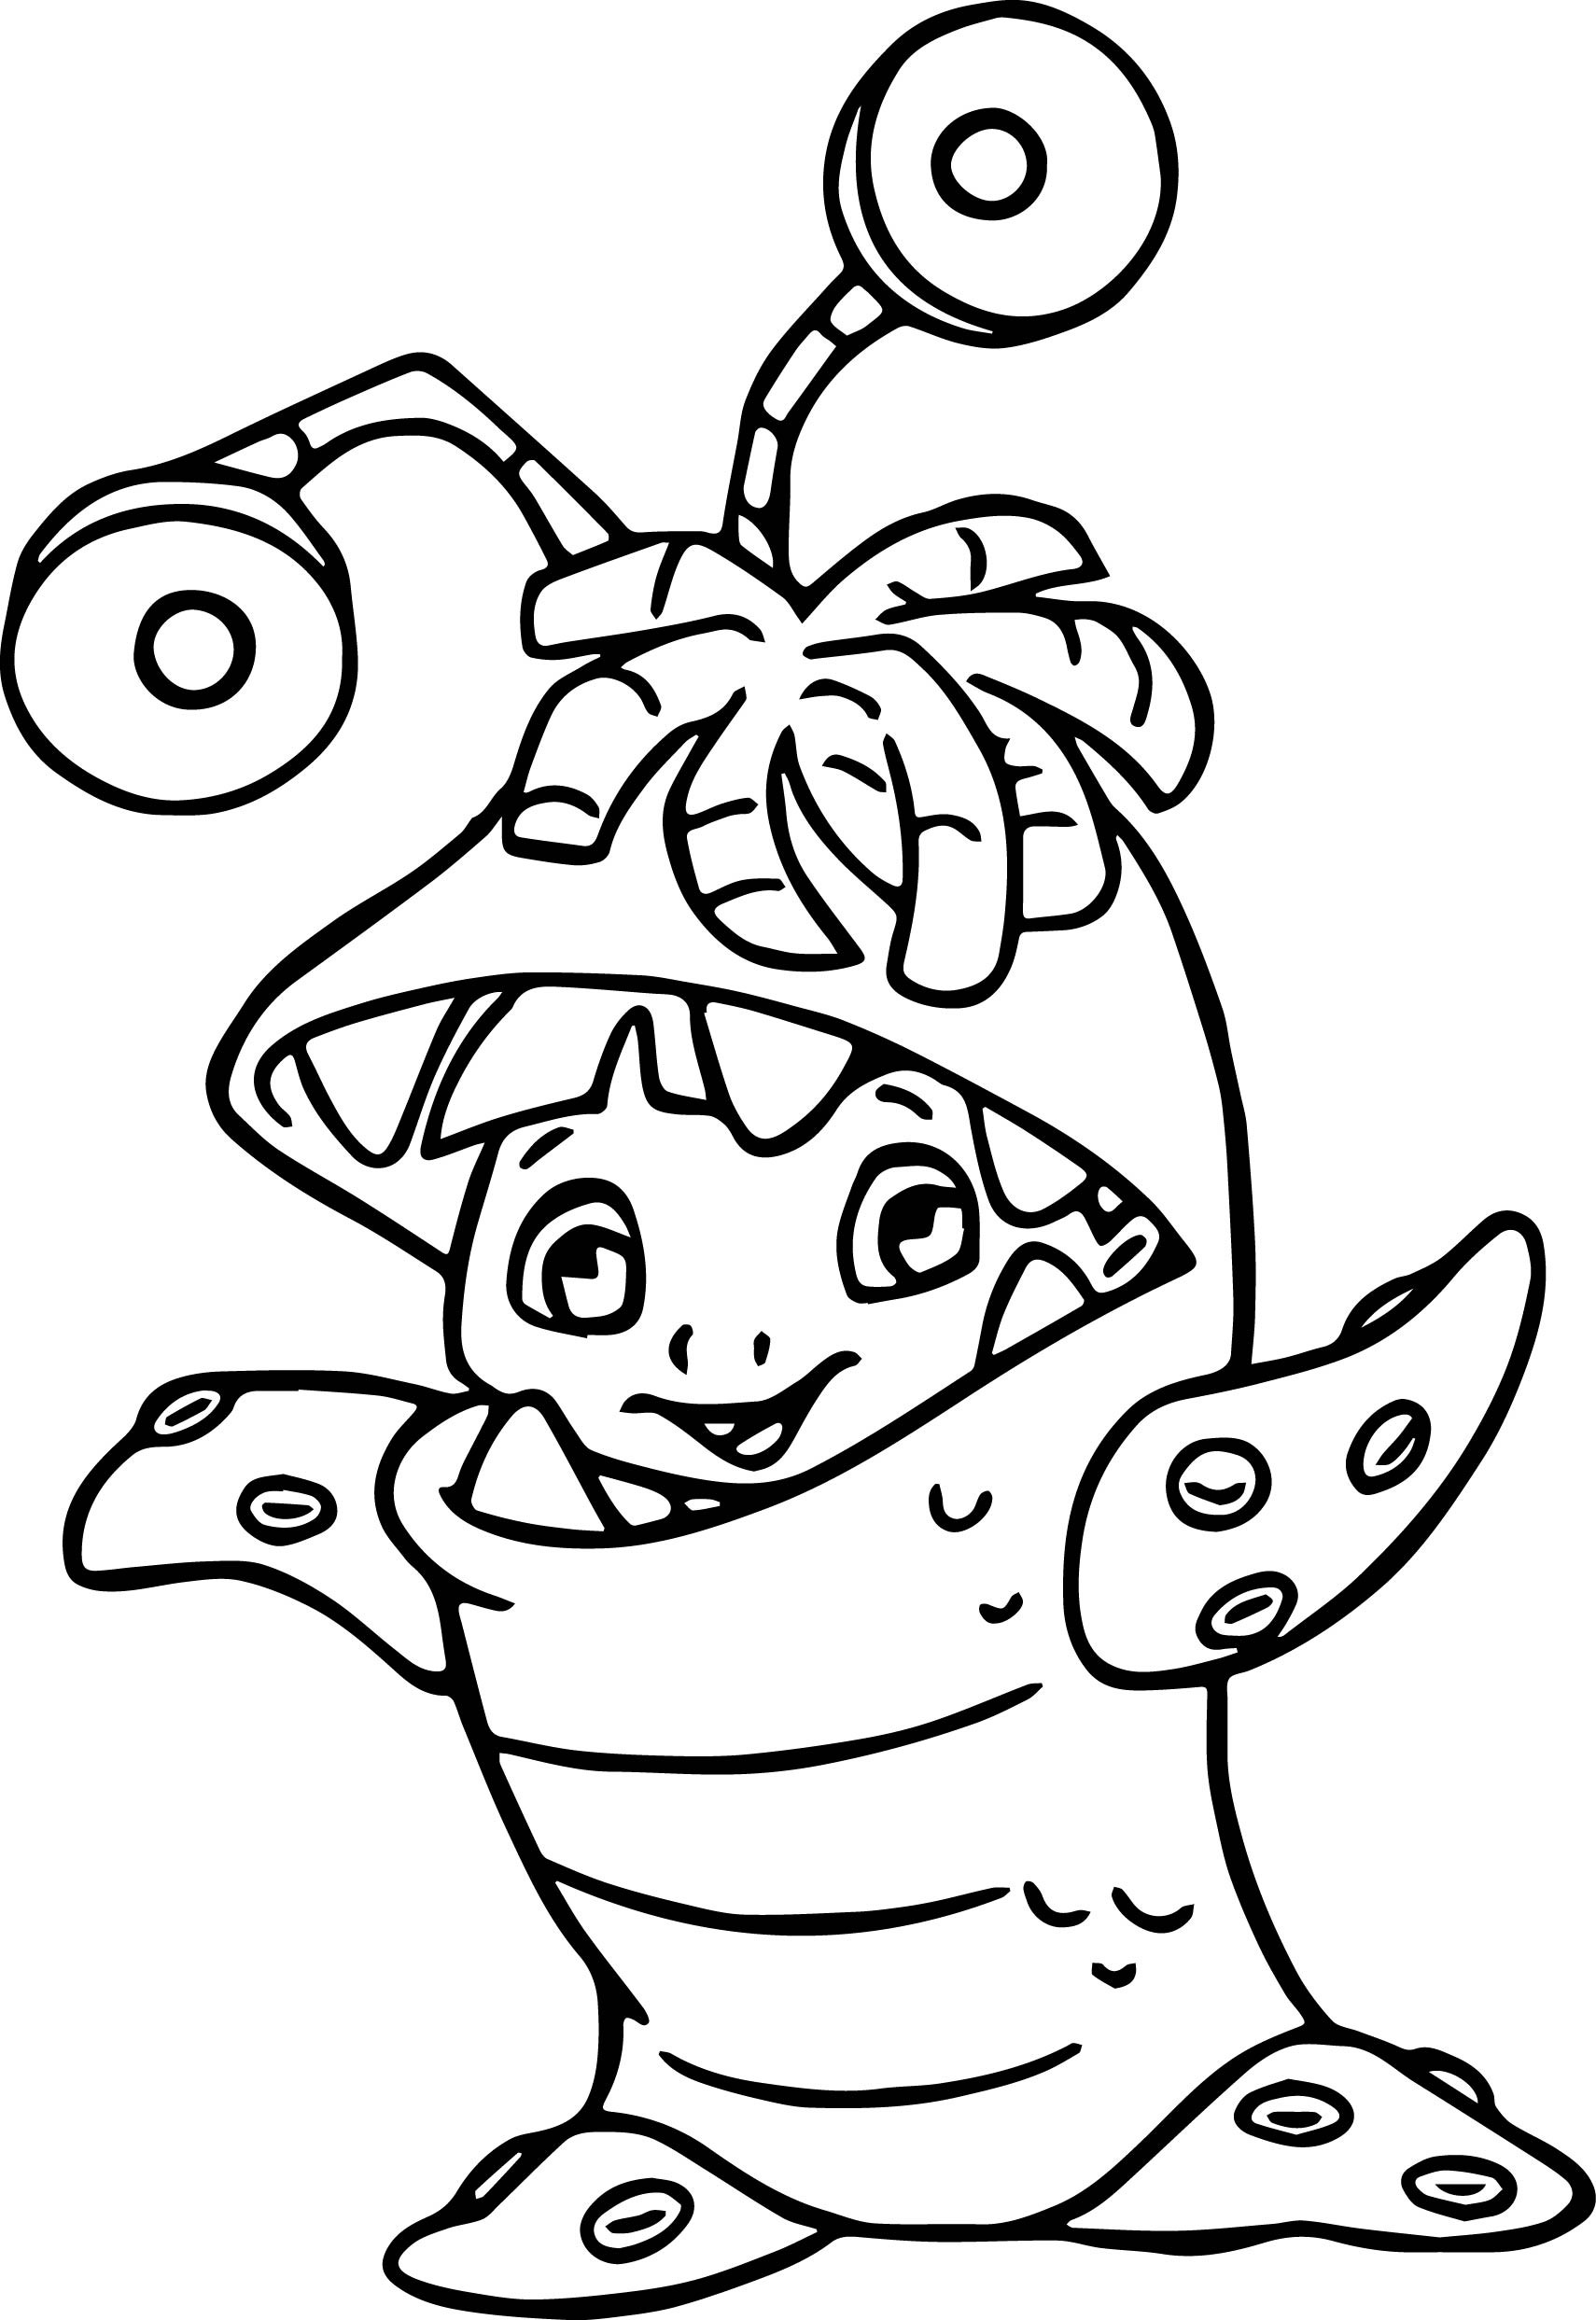 Free Printable Monster Inc Coloring Pages Pdf - Boo Monsters Inc Coloring Pages